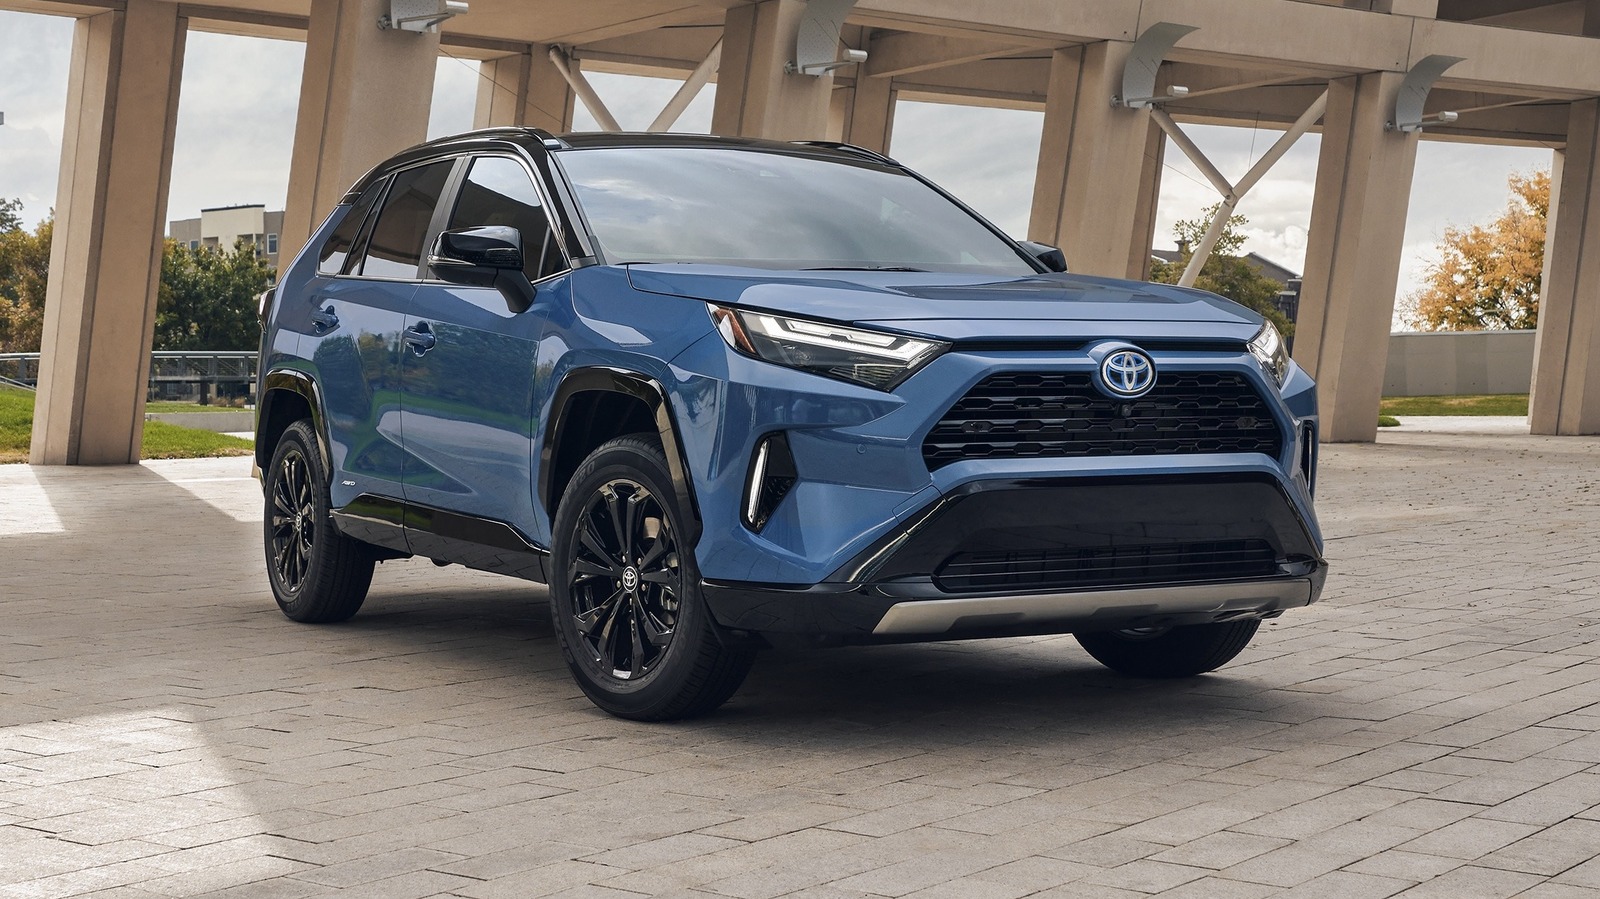 6 Of The Best Years To Consider If You're Searching For A Used Toyota RAV4